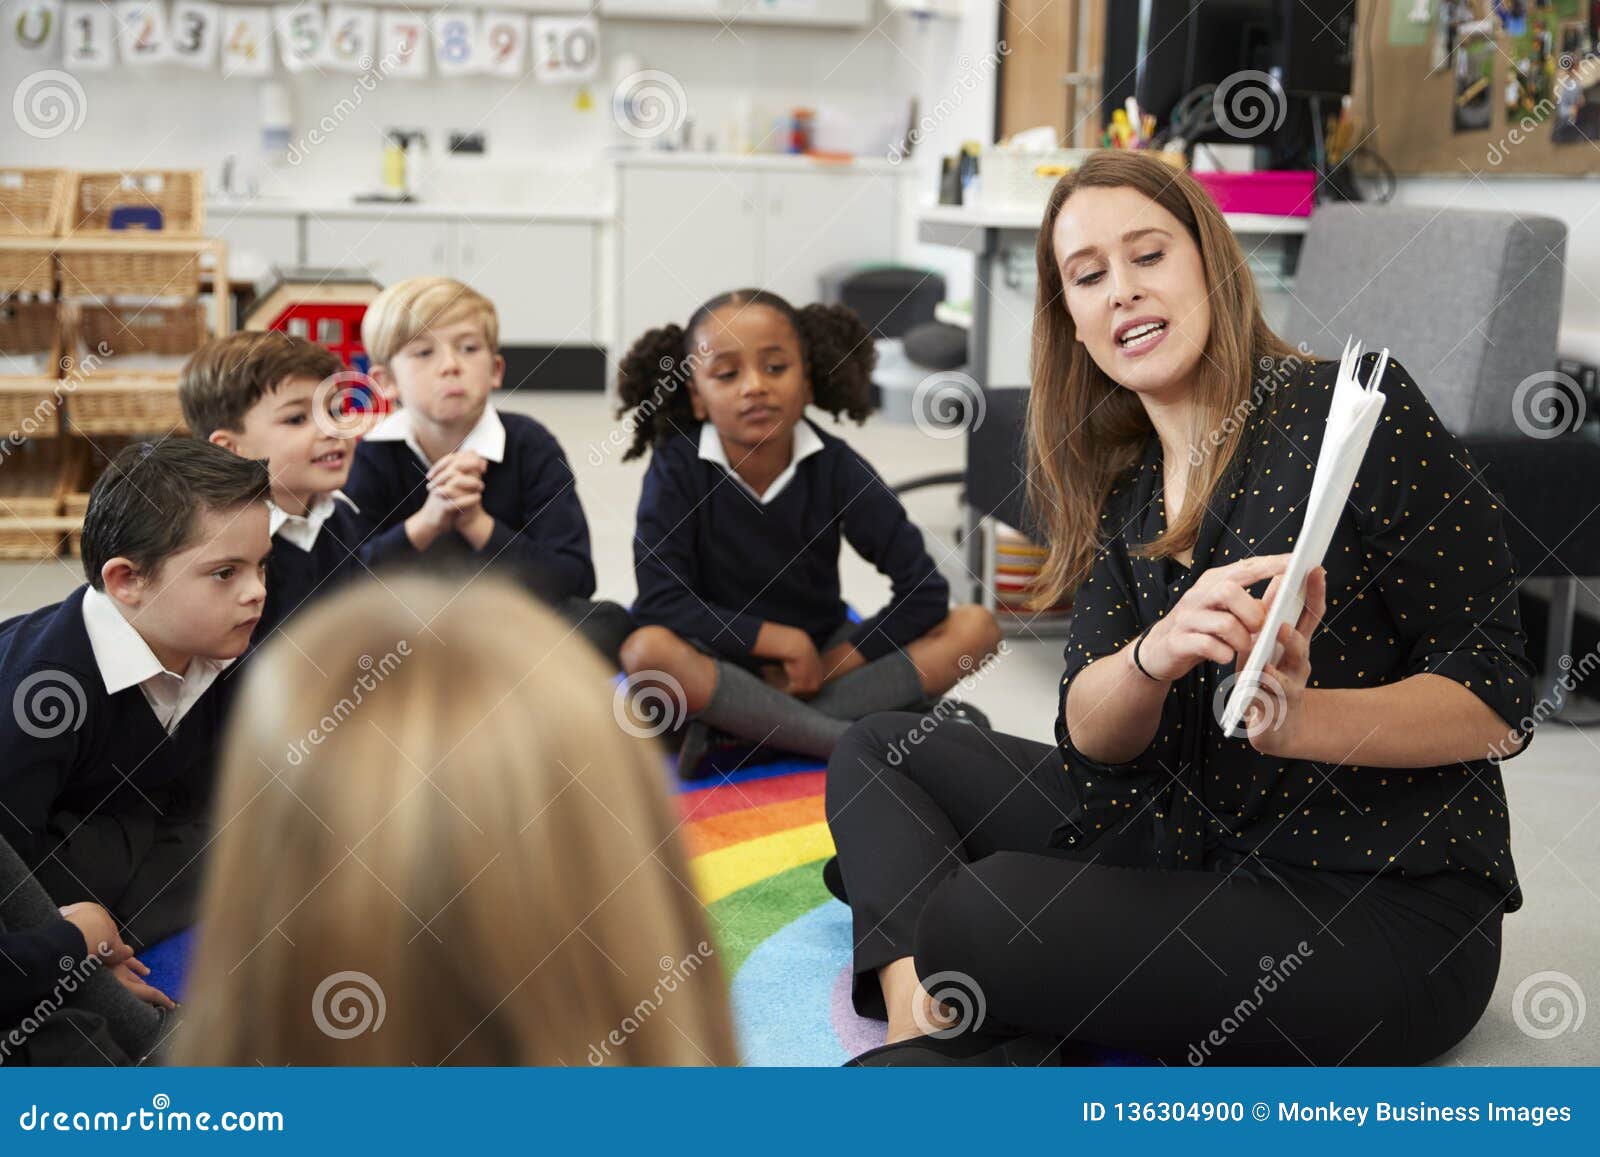 young female primary school teacher reading a book to children sitting on the floor in a classroom, selective focus